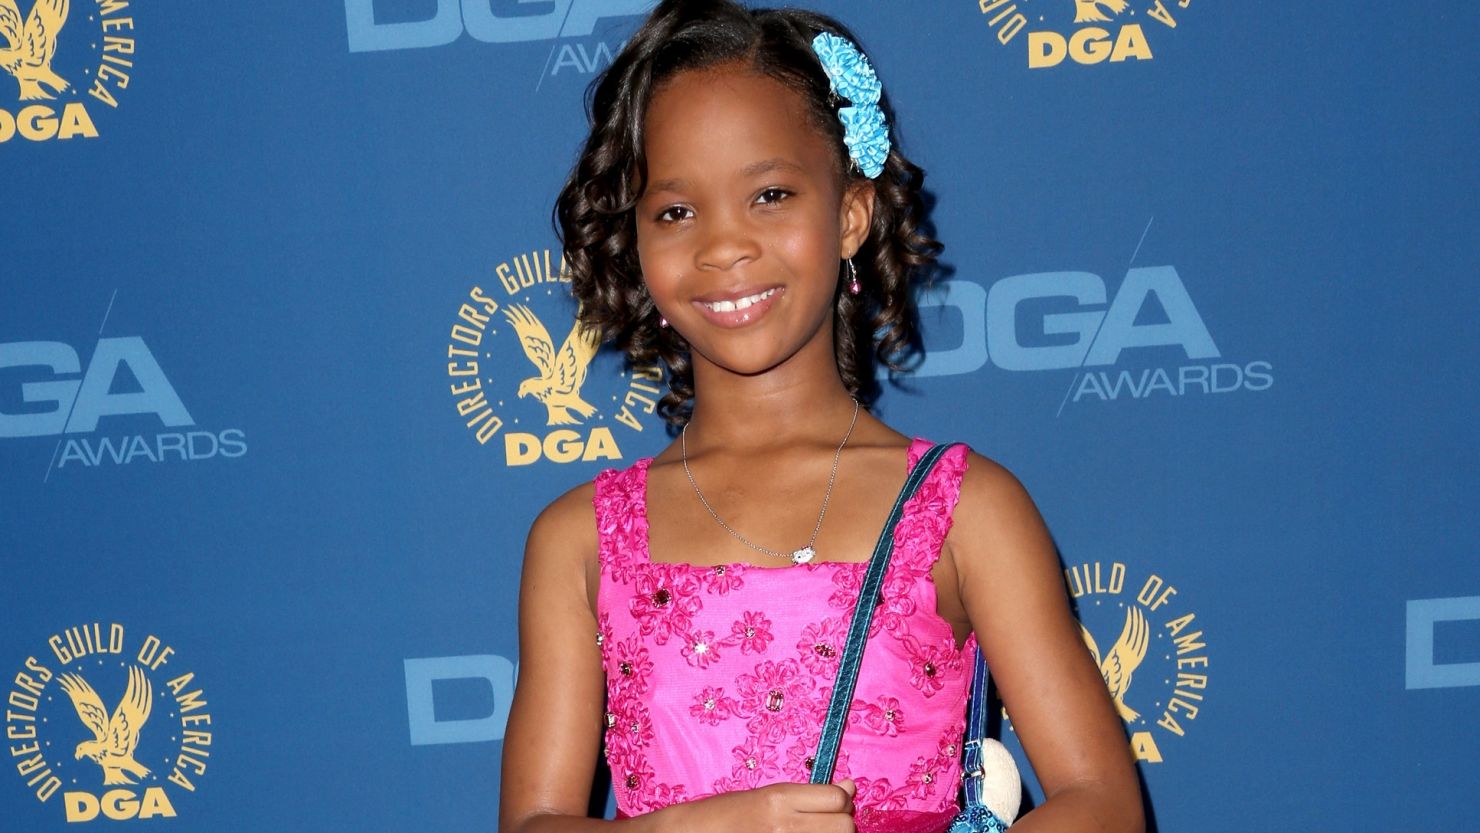 Oscar nominee Quvenzhané Wallis is in consideration for the "Annie" remake, but no decisions have been made.